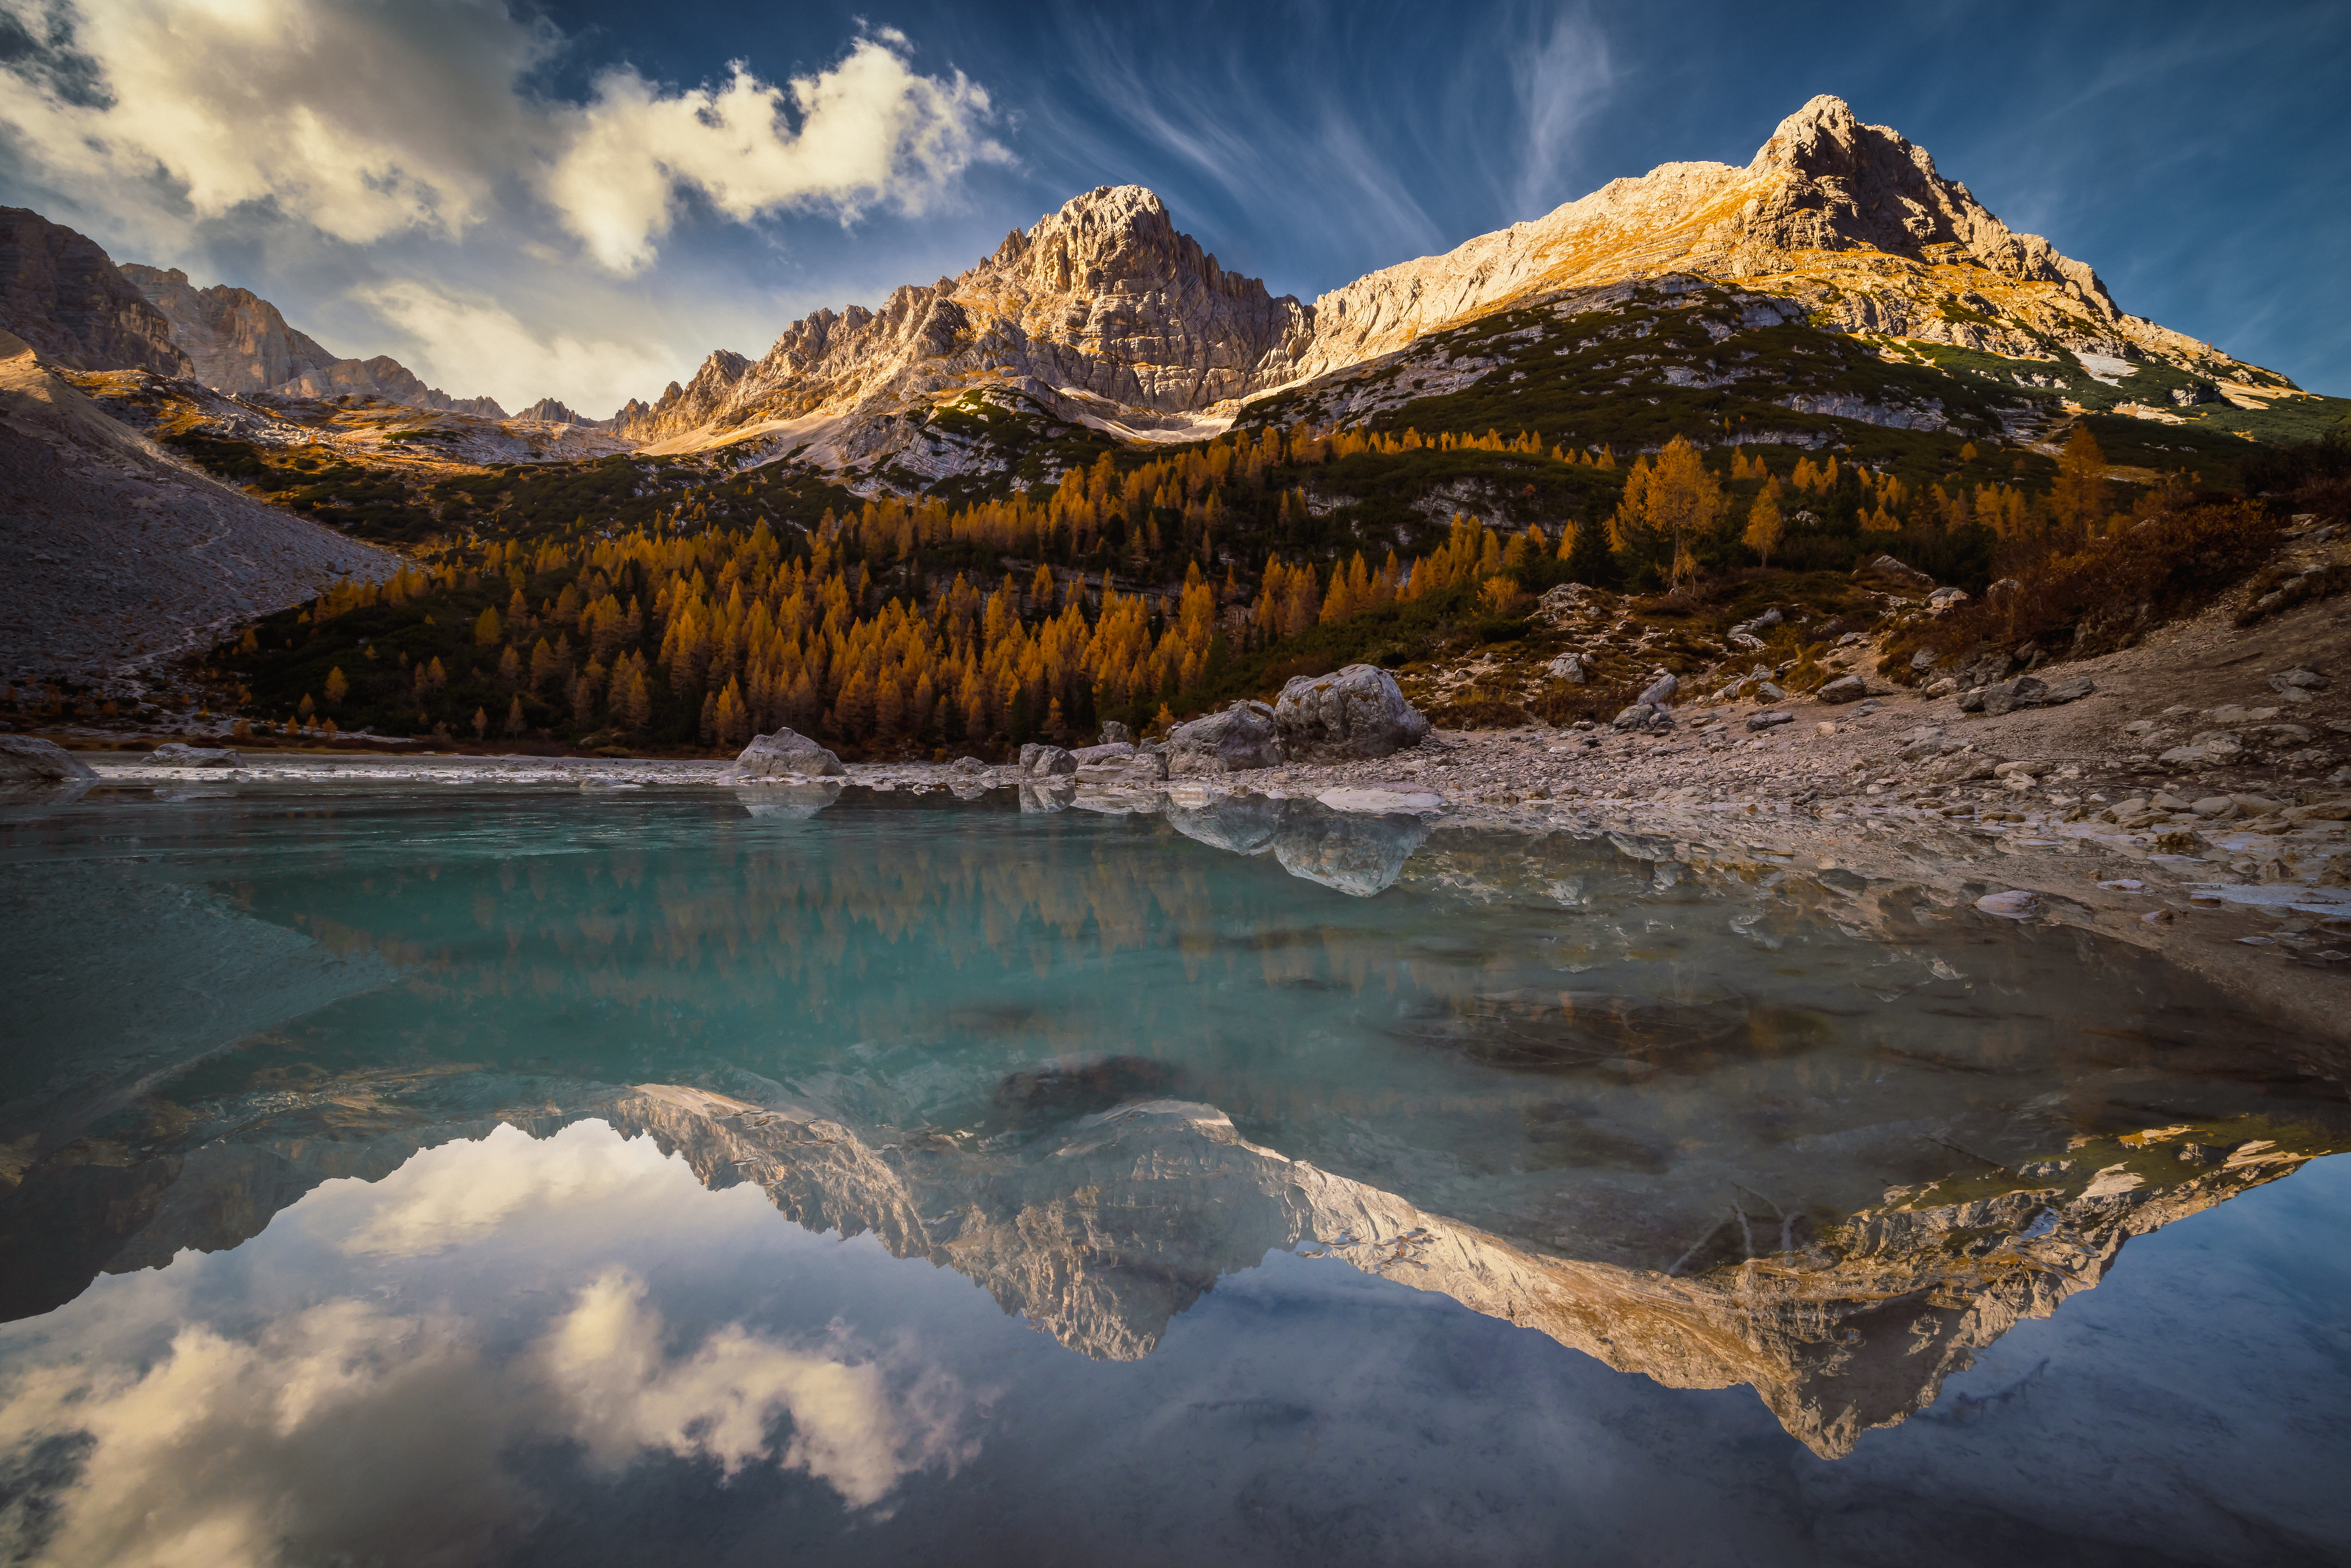 General 4096x2732 nature landscape trees clouds sky rocks mountains water reflection Italy